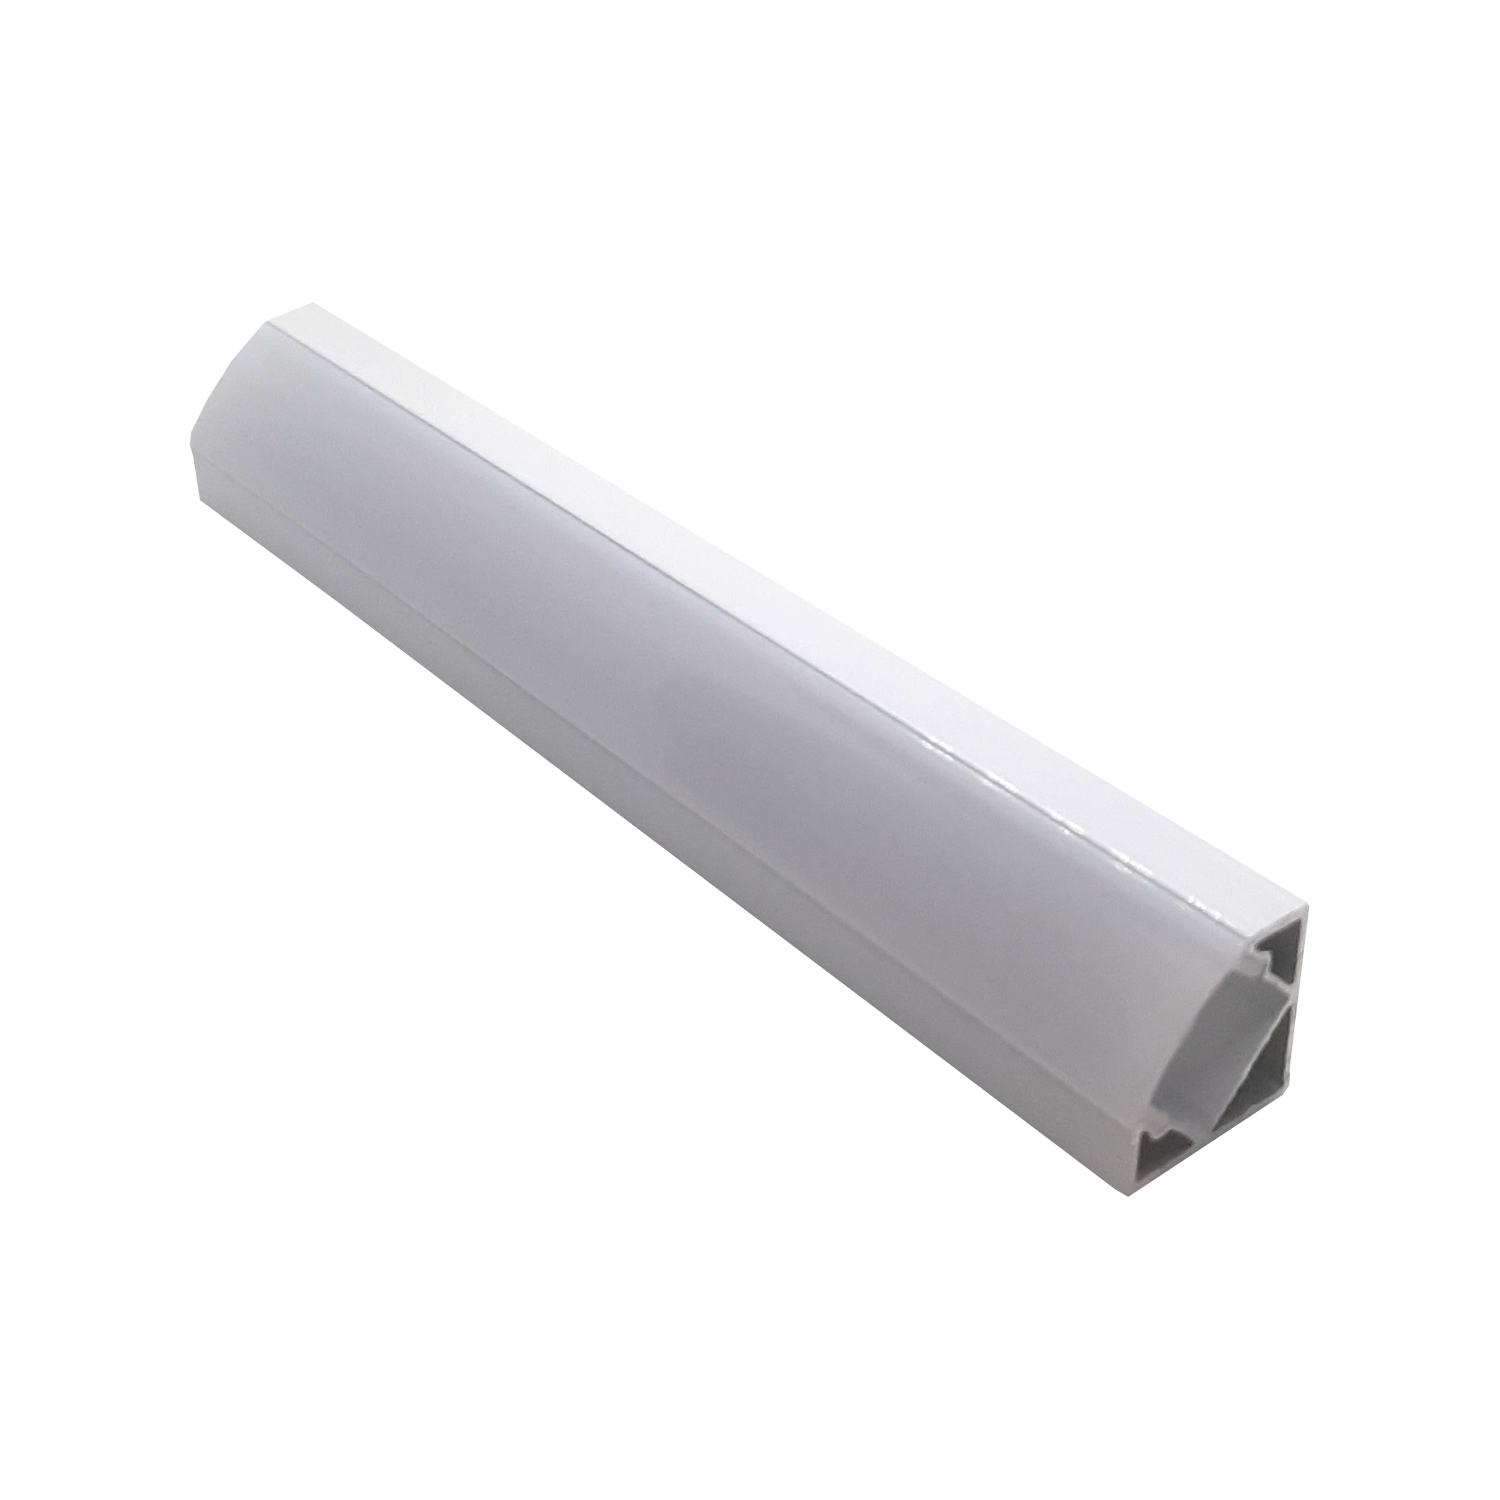 Product image of LXT15 White Angled Extrusion for LED Strip